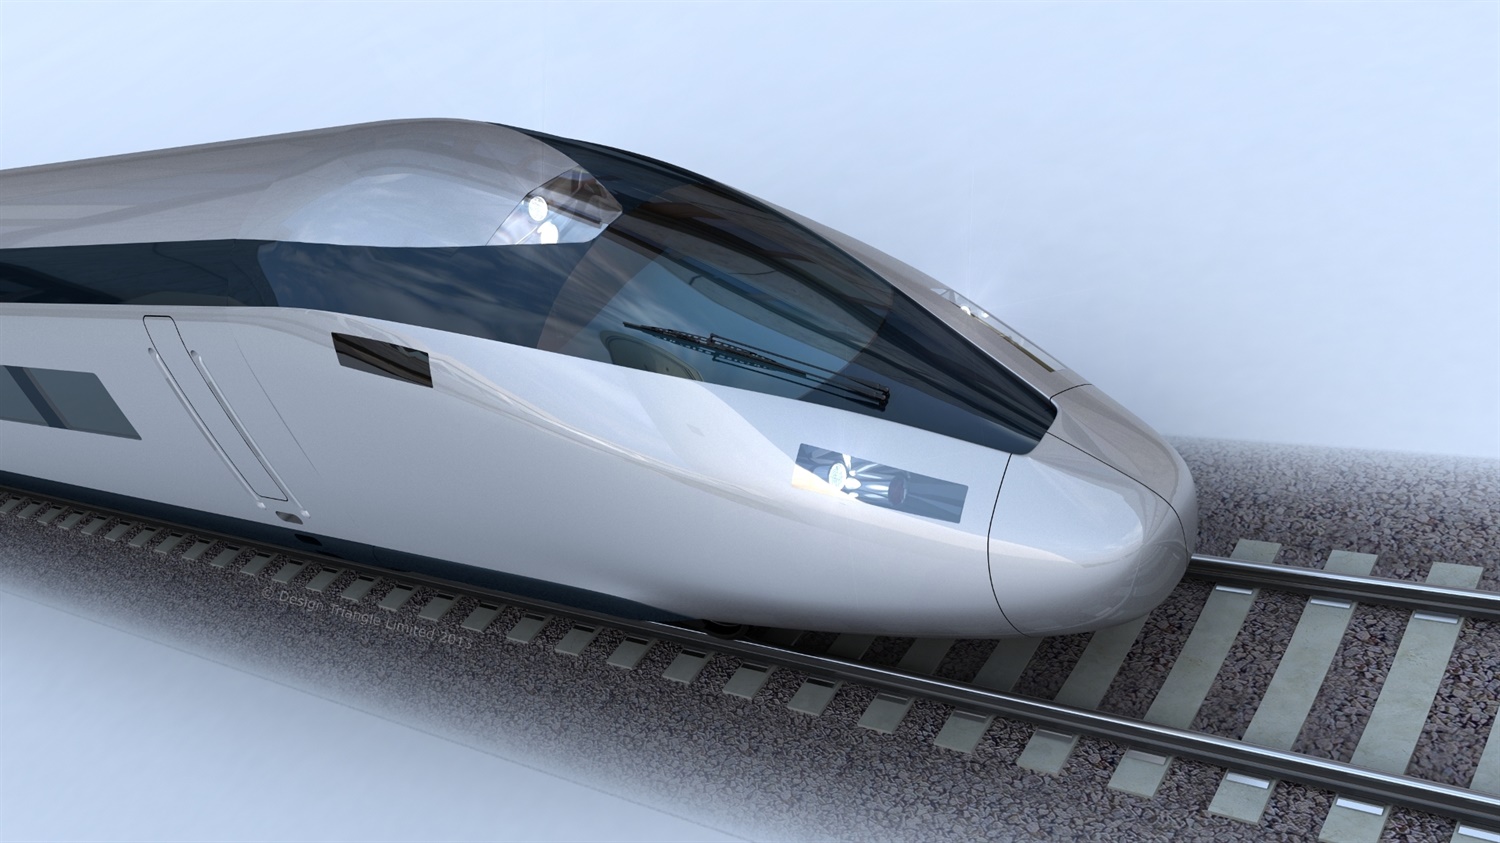 HS2 sets out design vision ‘from the pixel to the city’